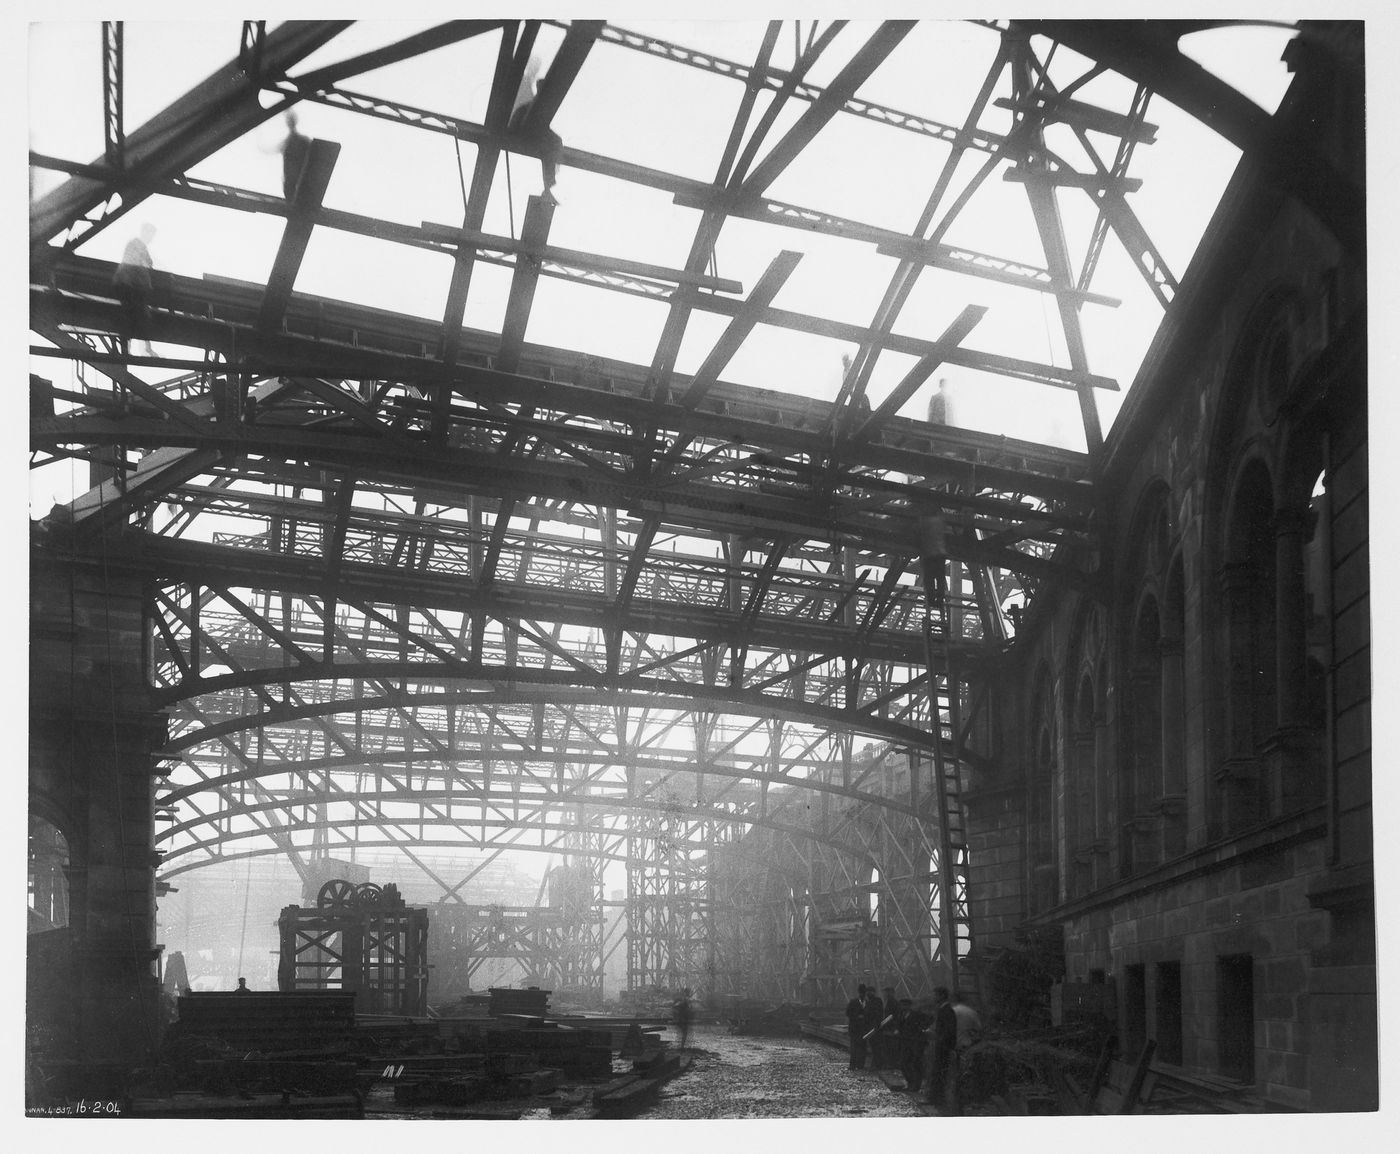 Construction of the Roof [sic], Central Station, Glasgow, 16 February 1904